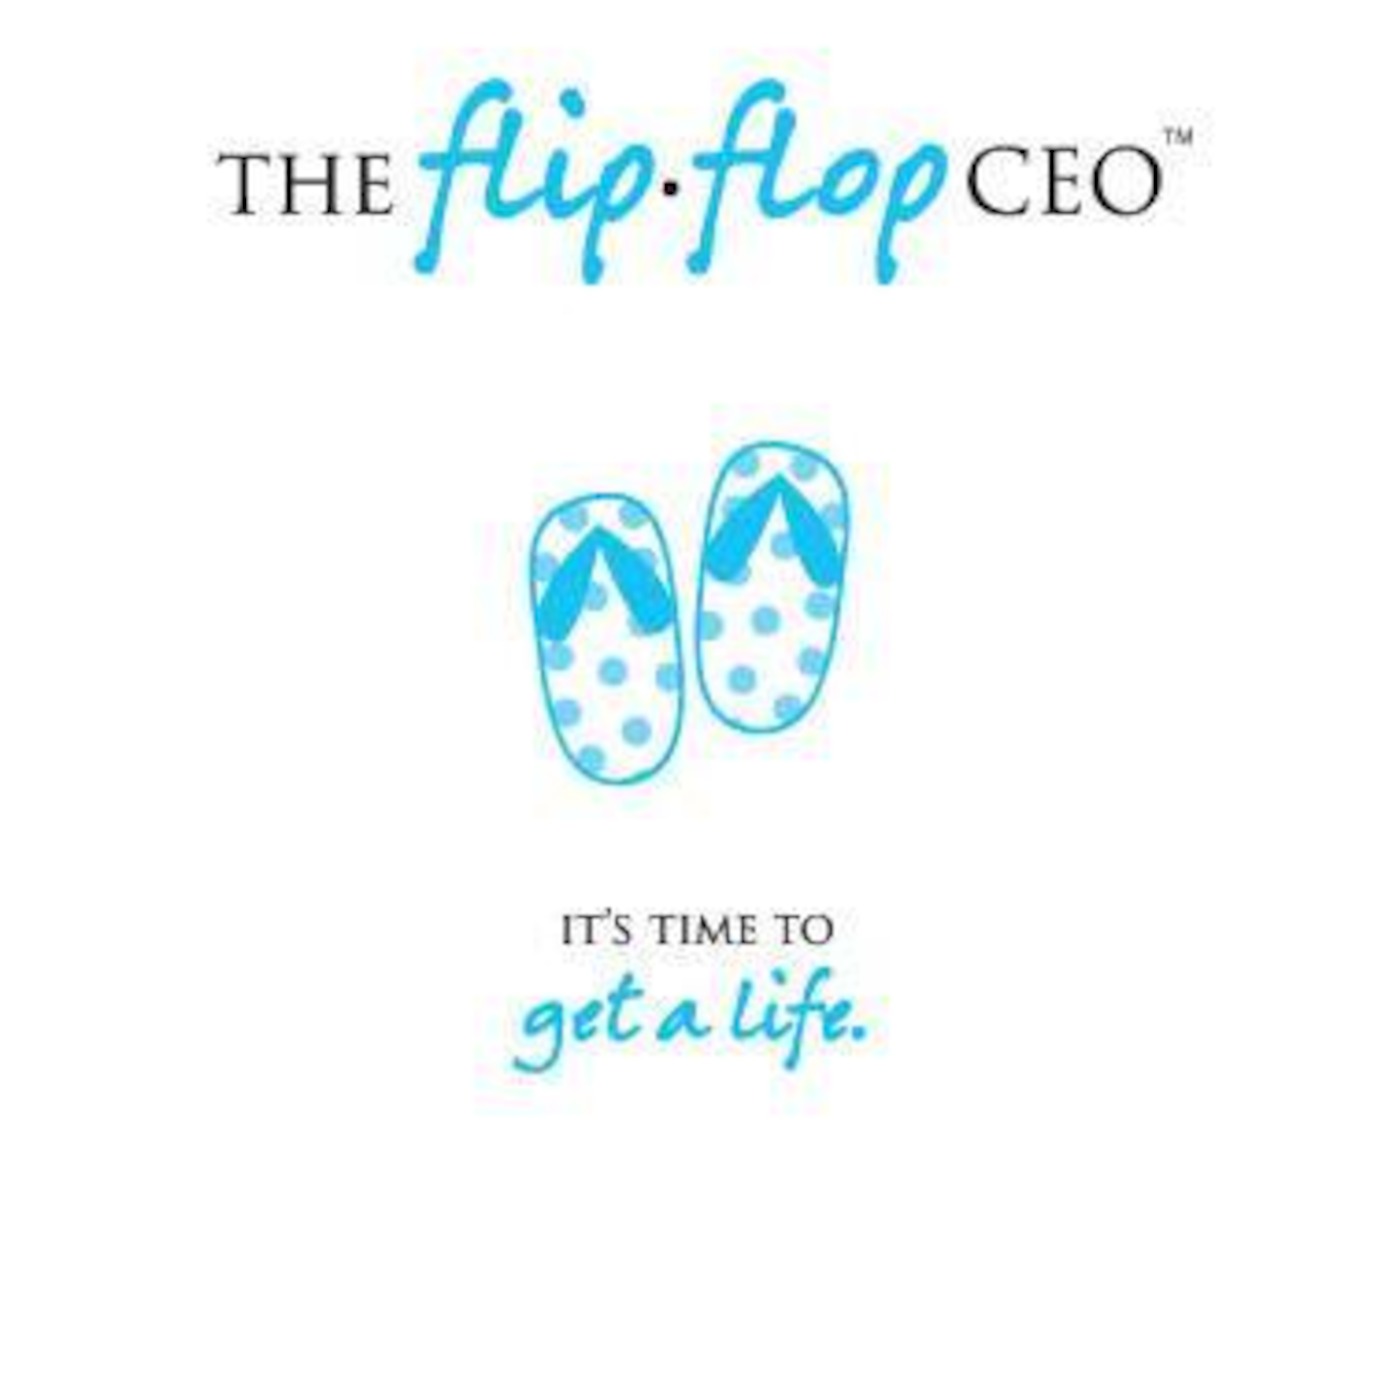 Big Dreamers' Club shares Inspiration from "The Flip Flop CEOs"